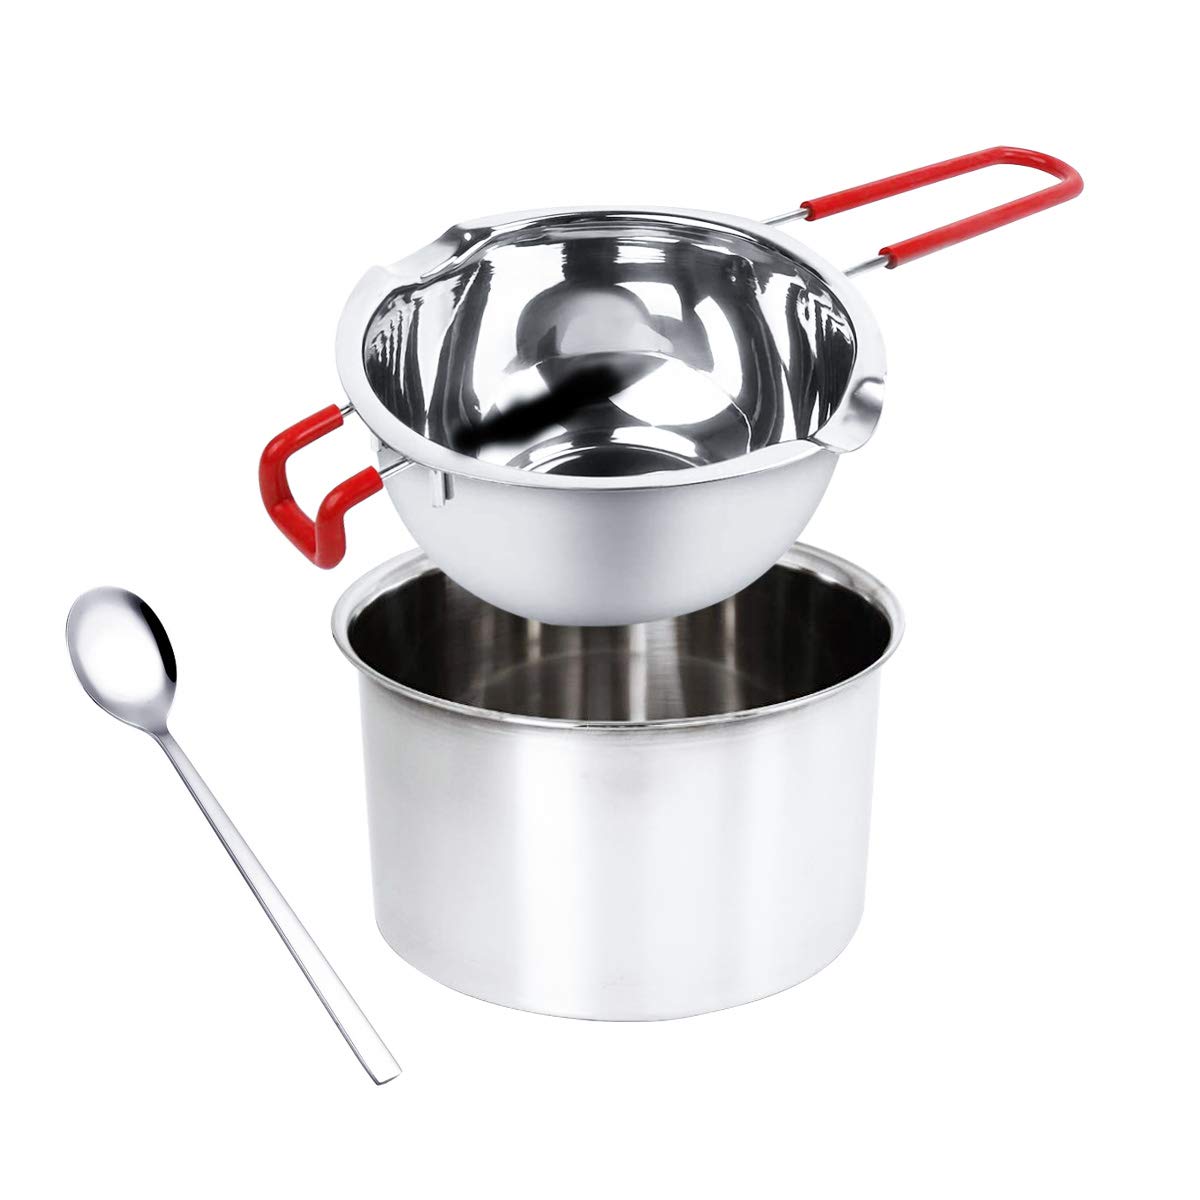 Yitokmc 2 Pack Stainless Steel Double Boiler Pot Chocolate Melting